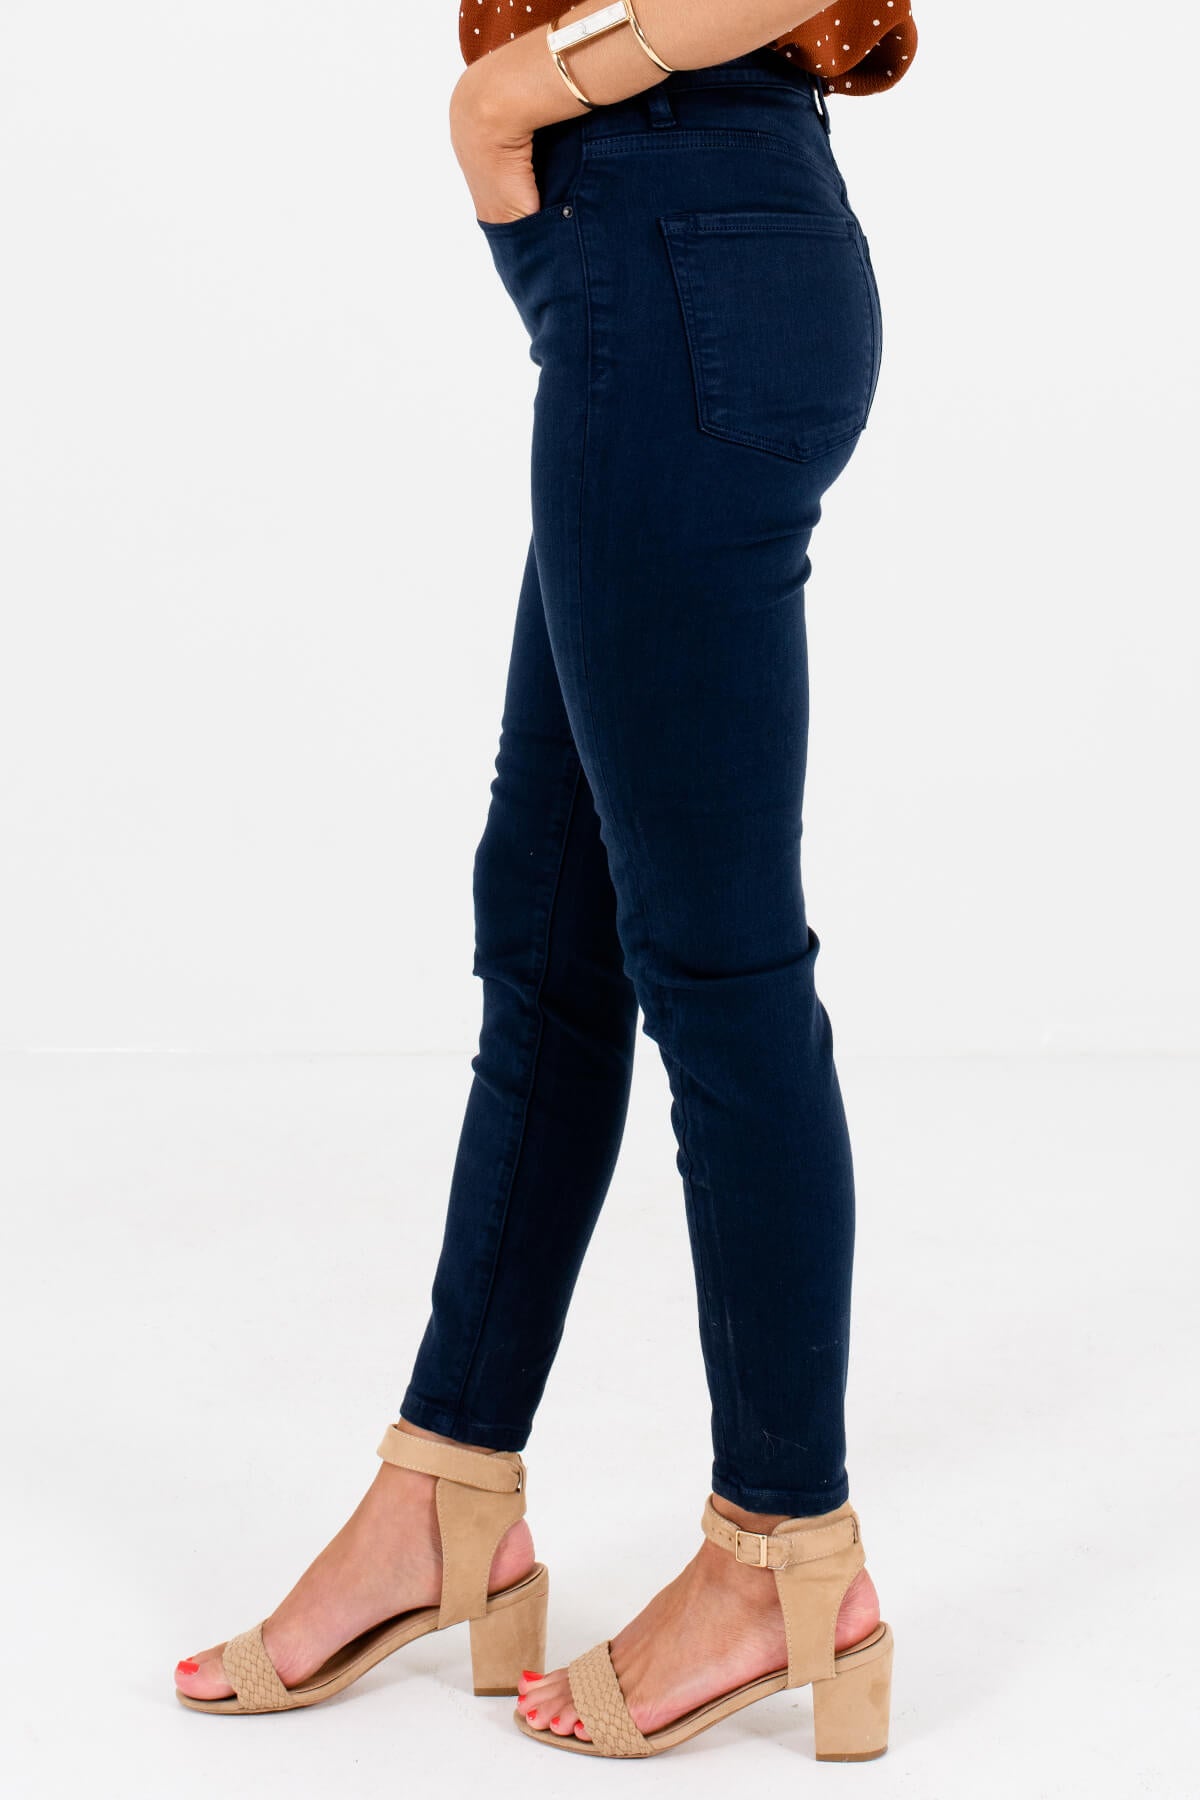 Navy Blue Silver Button and Zipper Front Boutique Jeans for Women